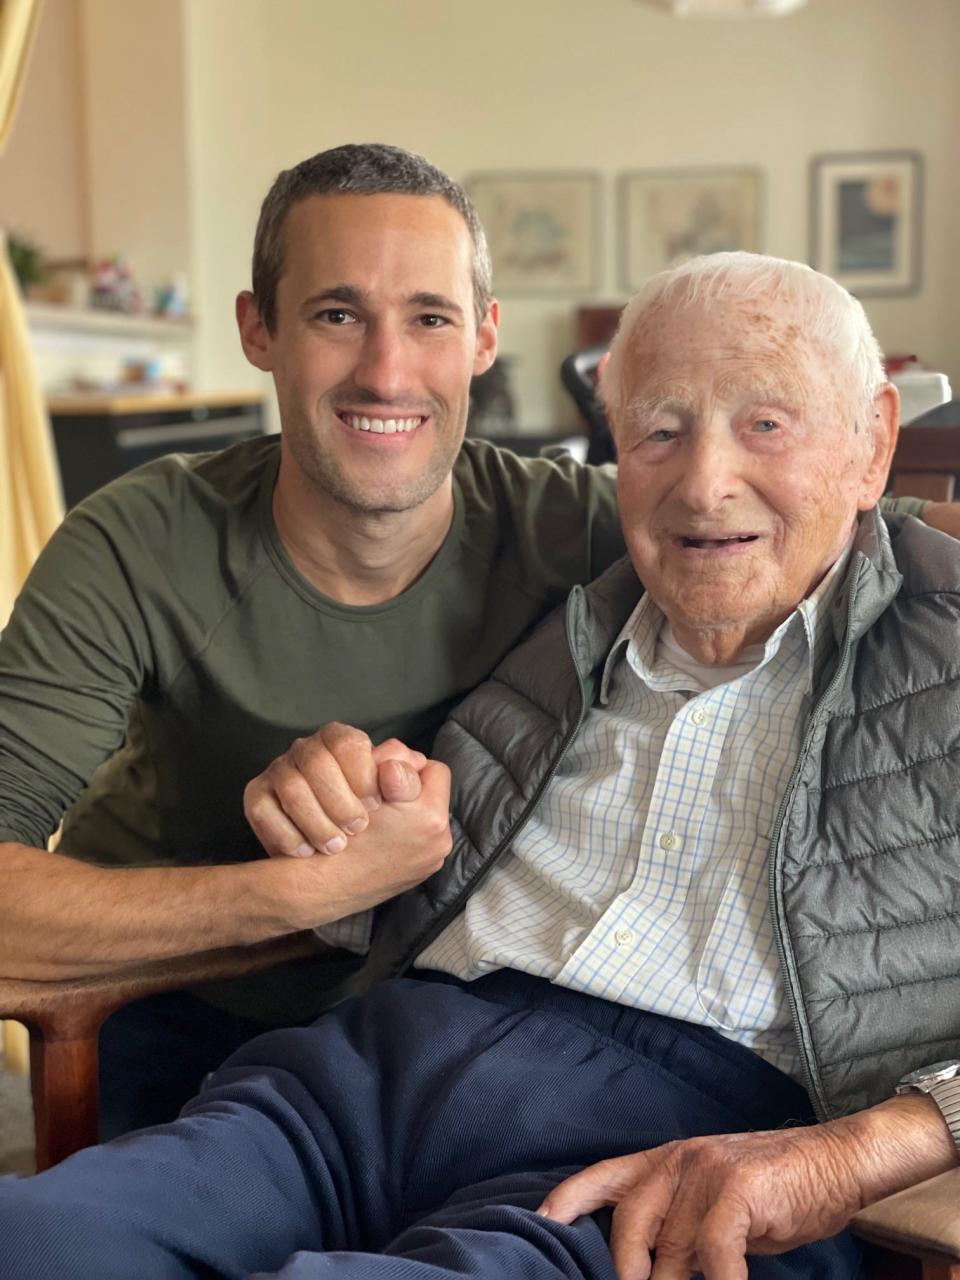 Morrie Markoff, pictured with his grandson Thomas Markoff, died recently at 110. His brain has been donated to science and his family hopes the donation can help shed light on aging and mental acuity.